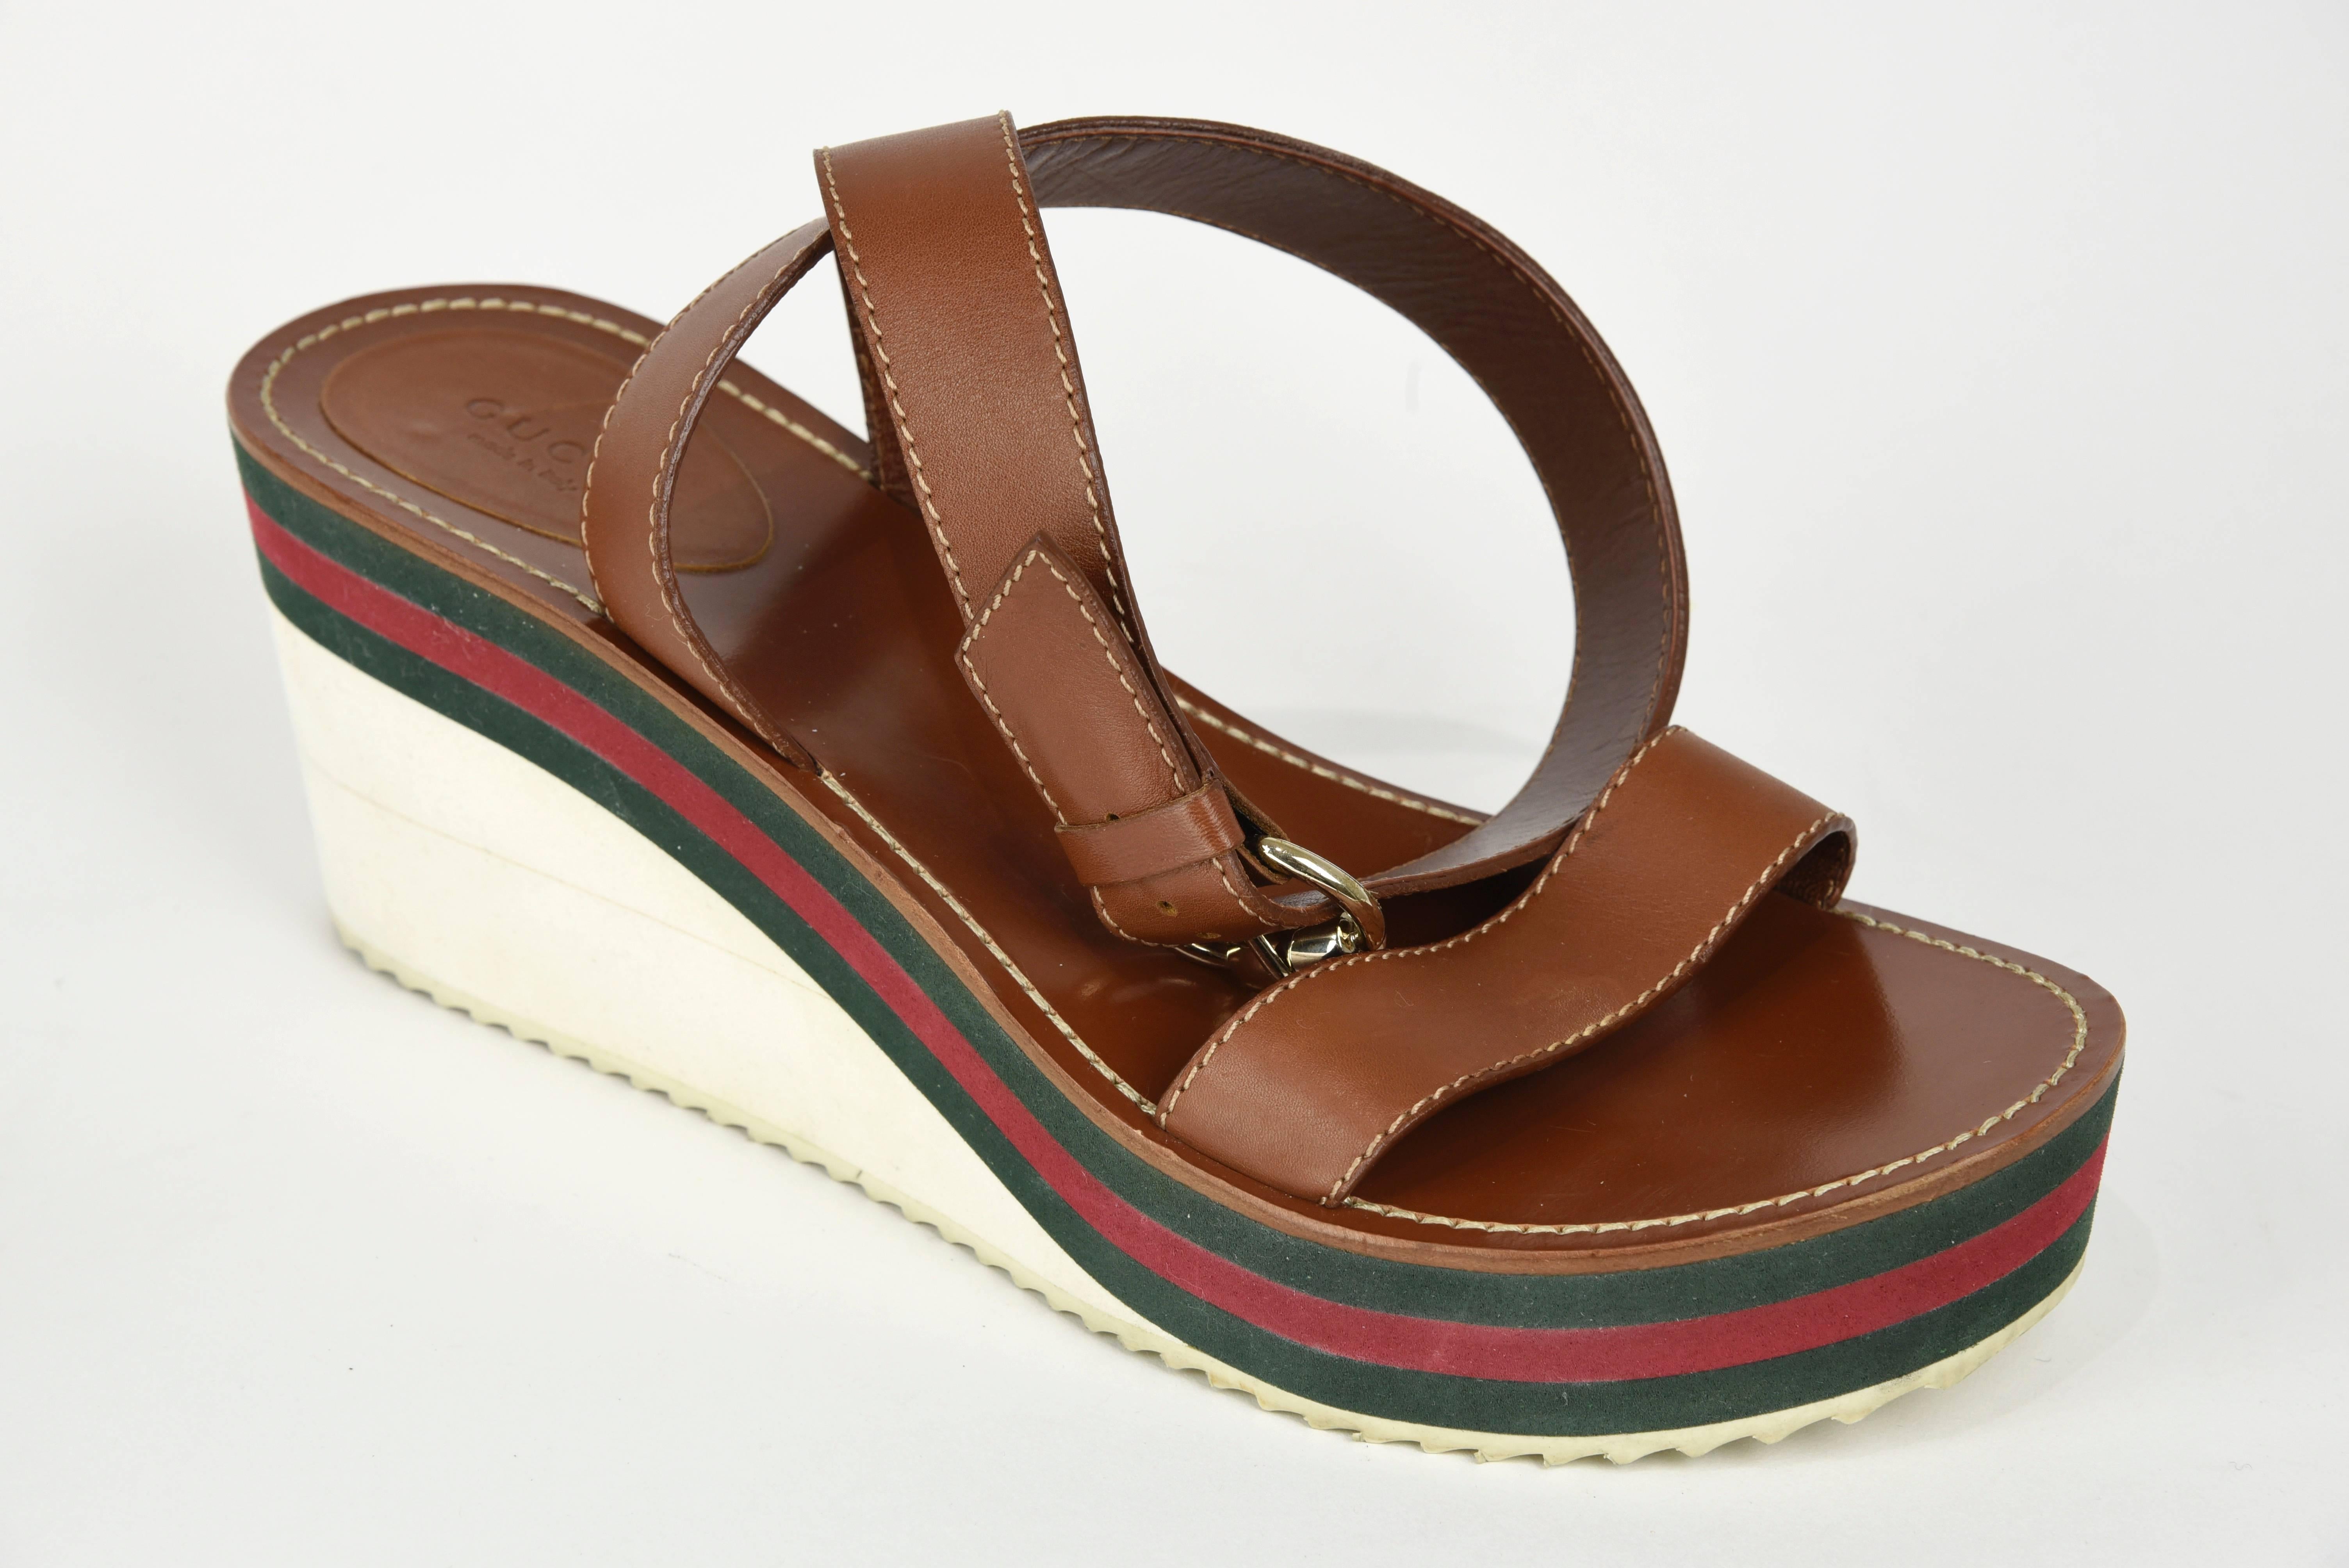 Women's 2000s Gucci Brown, Red and Green Platform Sandals with Ankle Wrap, Size 10 B